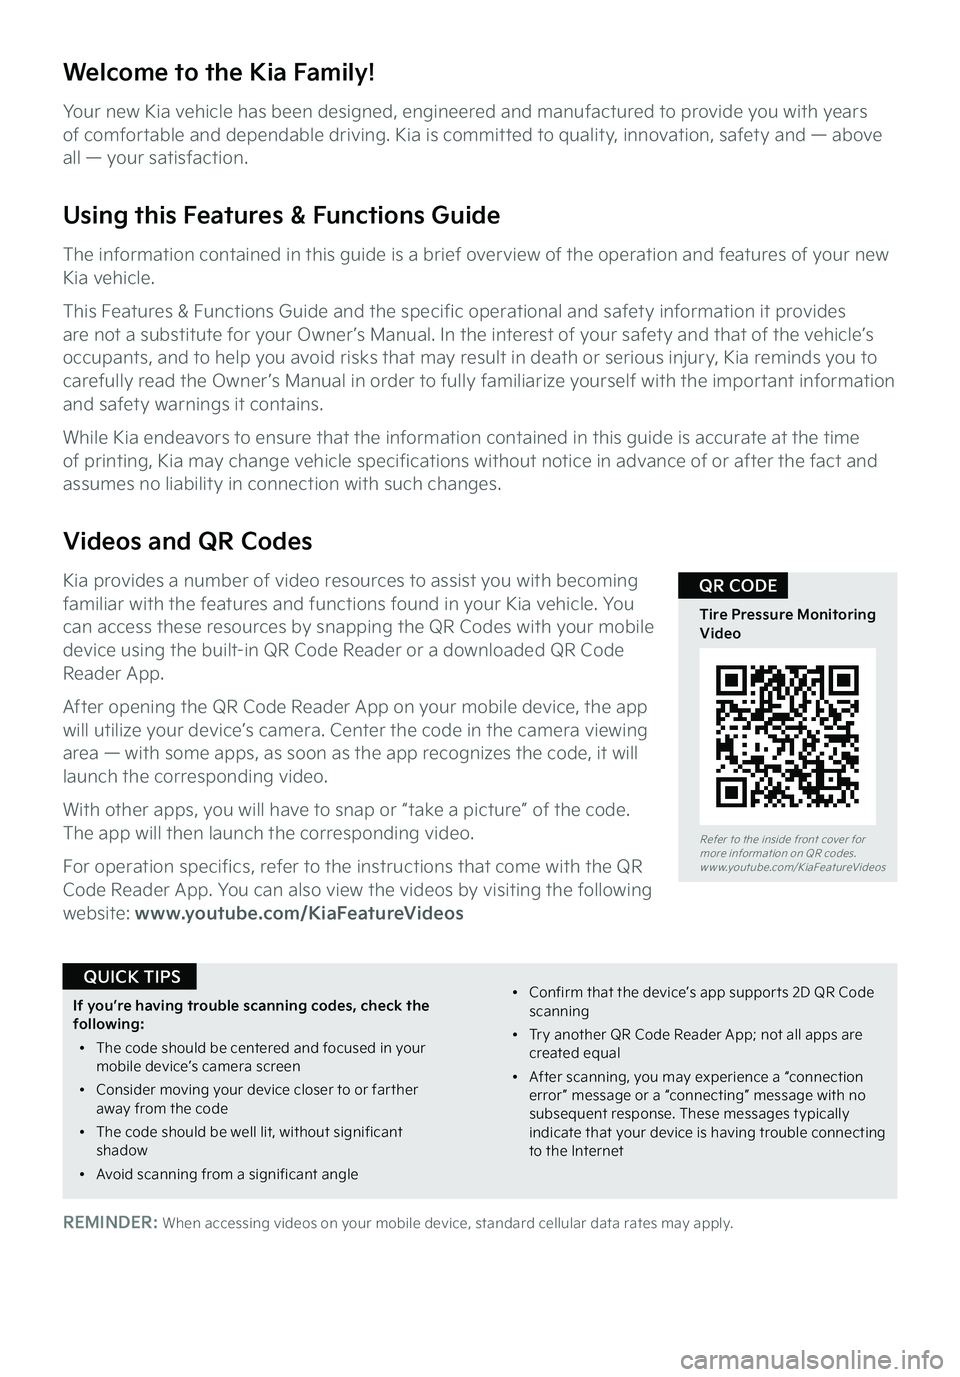 KIA TELLURIDE 2022  Features and Functions Guide Refer to the inside front cover for  more information on QR codes.www.youtube.com/KiaFeatureVideos
TirePressure Monitoring Video
QRCODE
WelcometotheKiaFamily!
Your new 